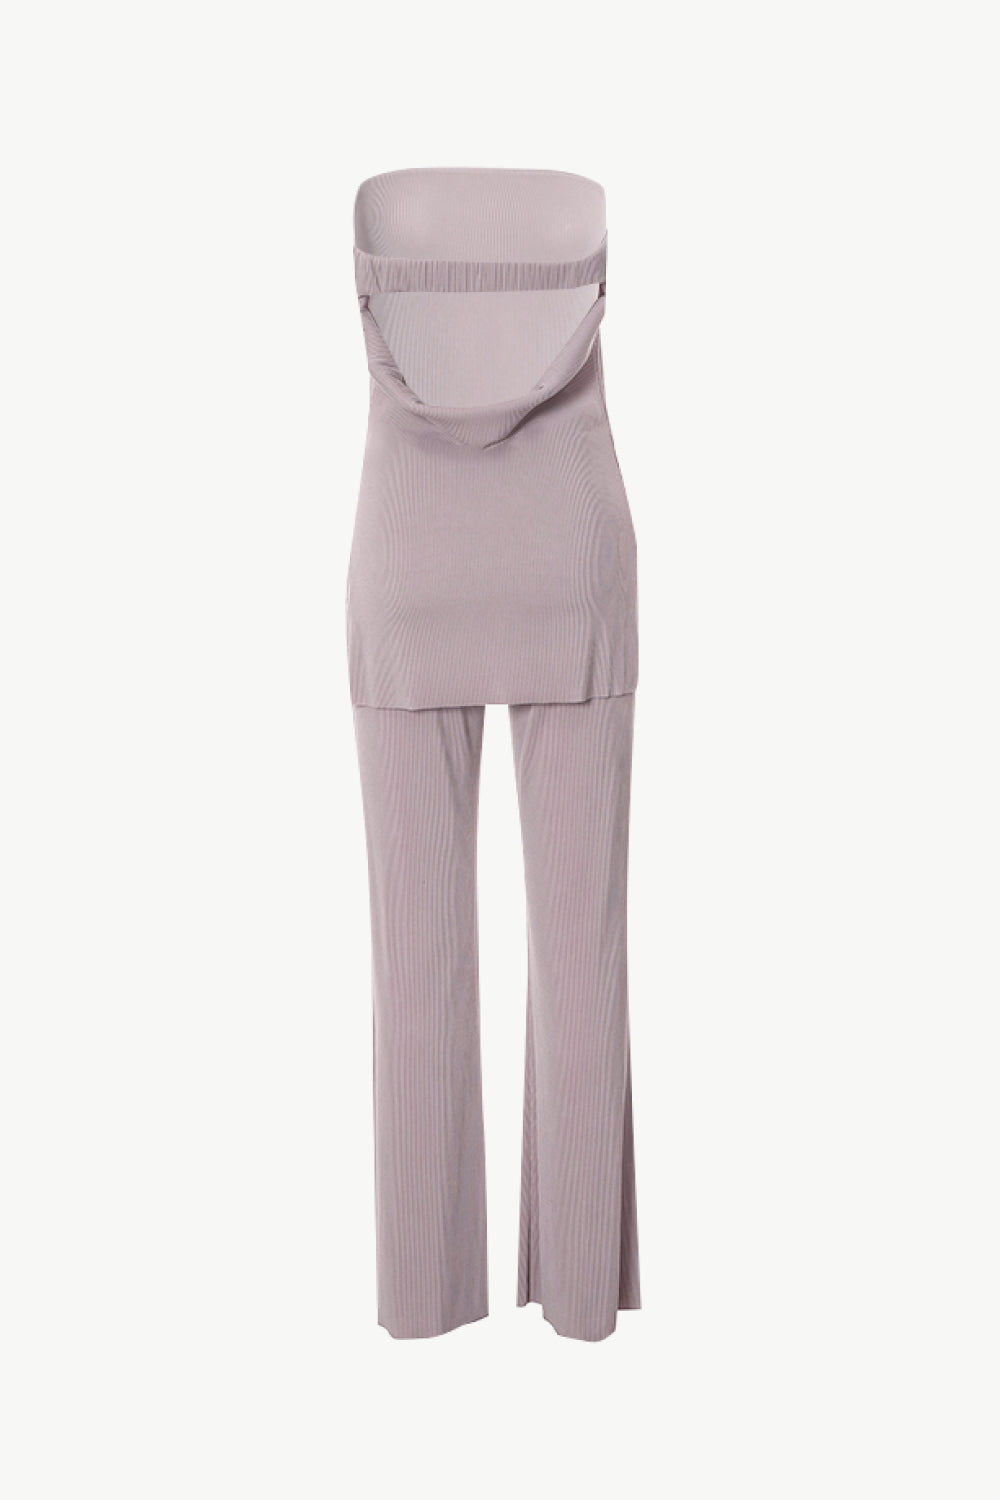 SMOOTH LIKE BUTTER STRAPLESS TOP WITH WIDE LEG PANT SET